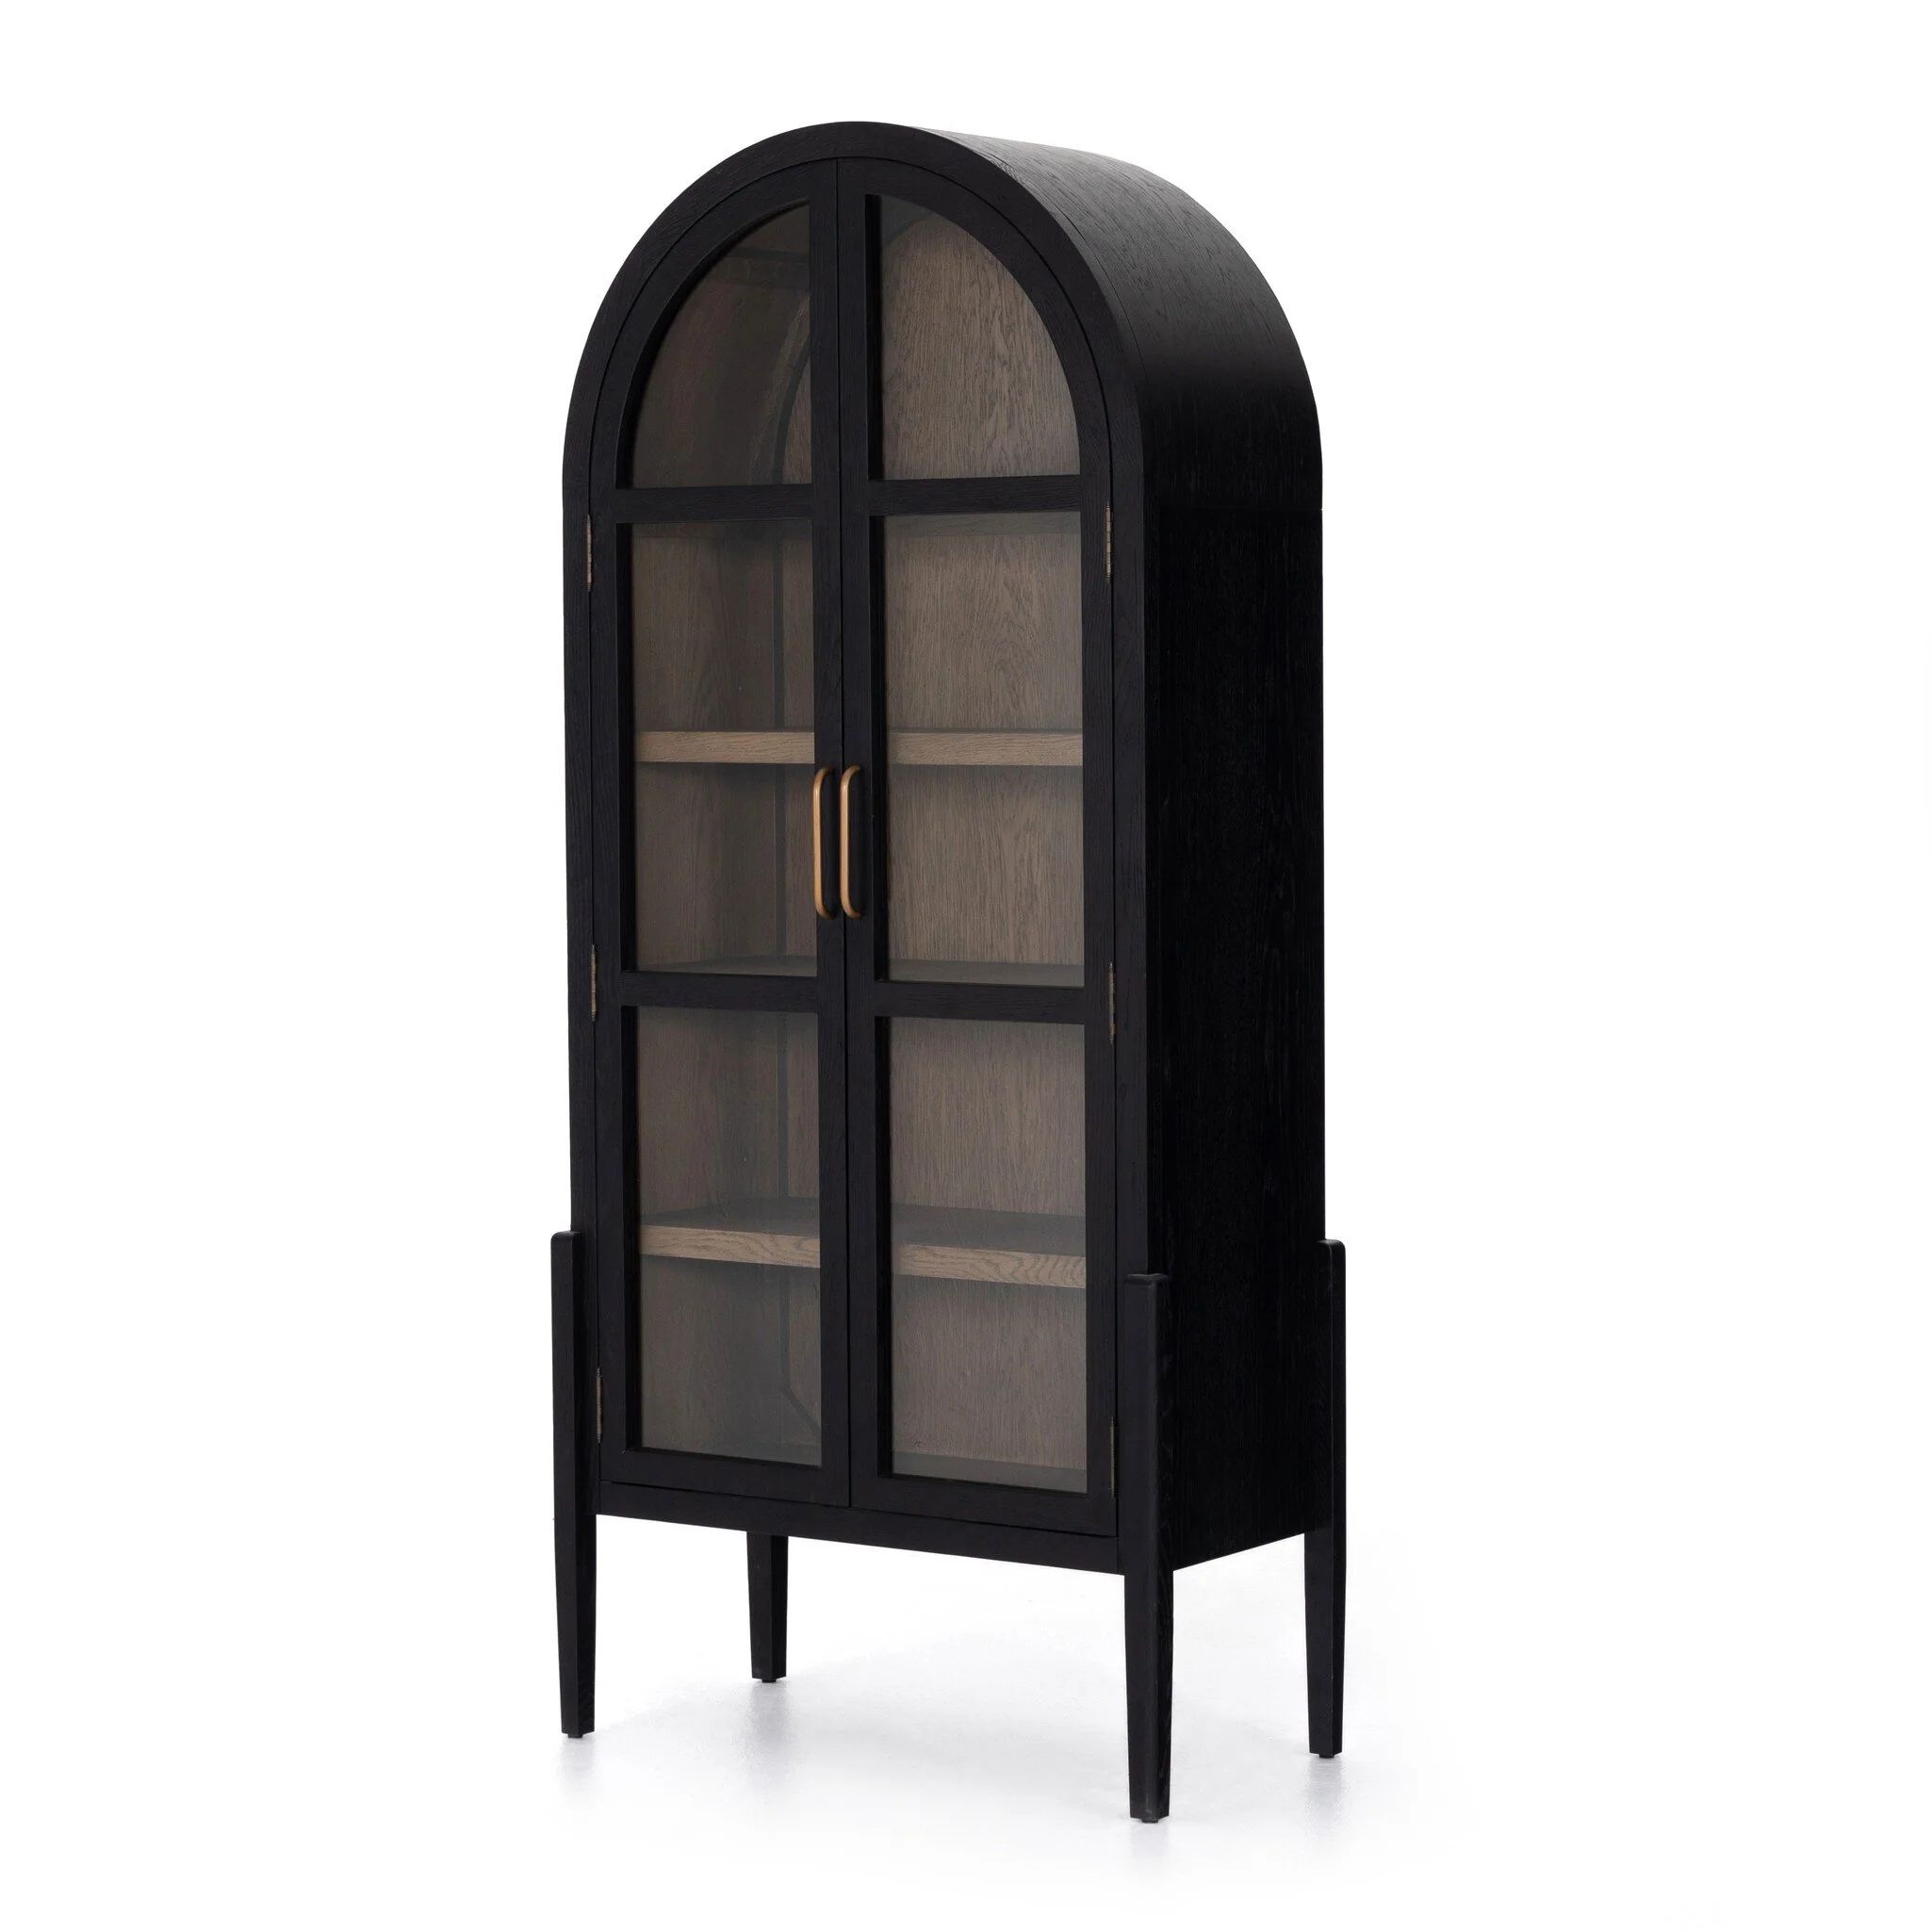 Tolle Cabinet - Drifted Matte Black | ready to ship! | Eco Chic Home